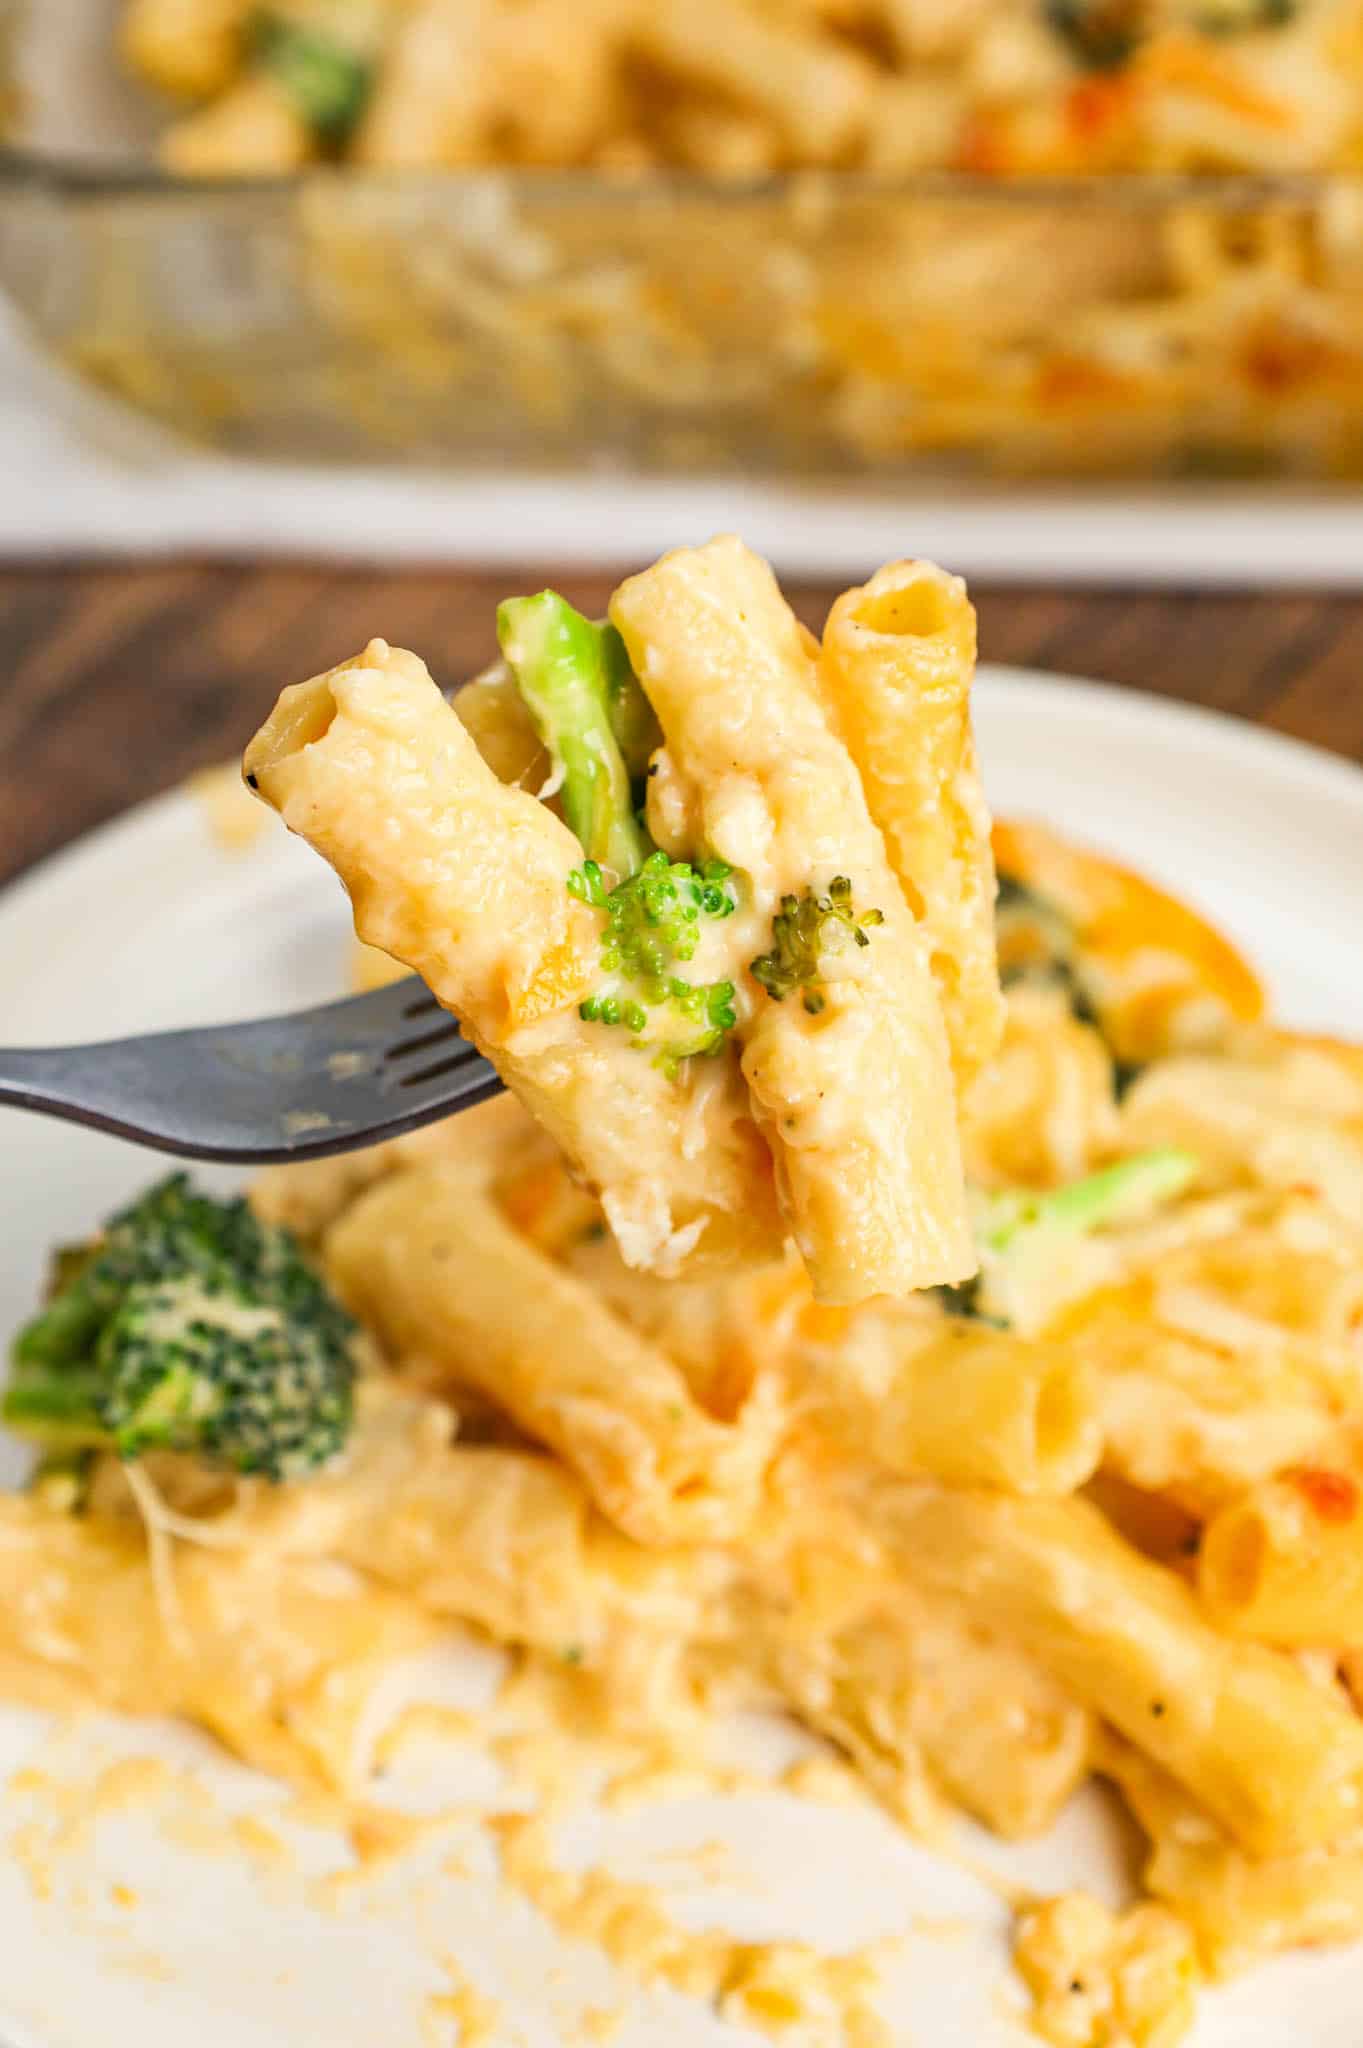 Chicken Broccoli Ziti is an easy baked pasta recipe loaded with shredded chicken, broccoli florets, cream of chicken soup, cheddar soup, cheddar and mozzarella cheese.